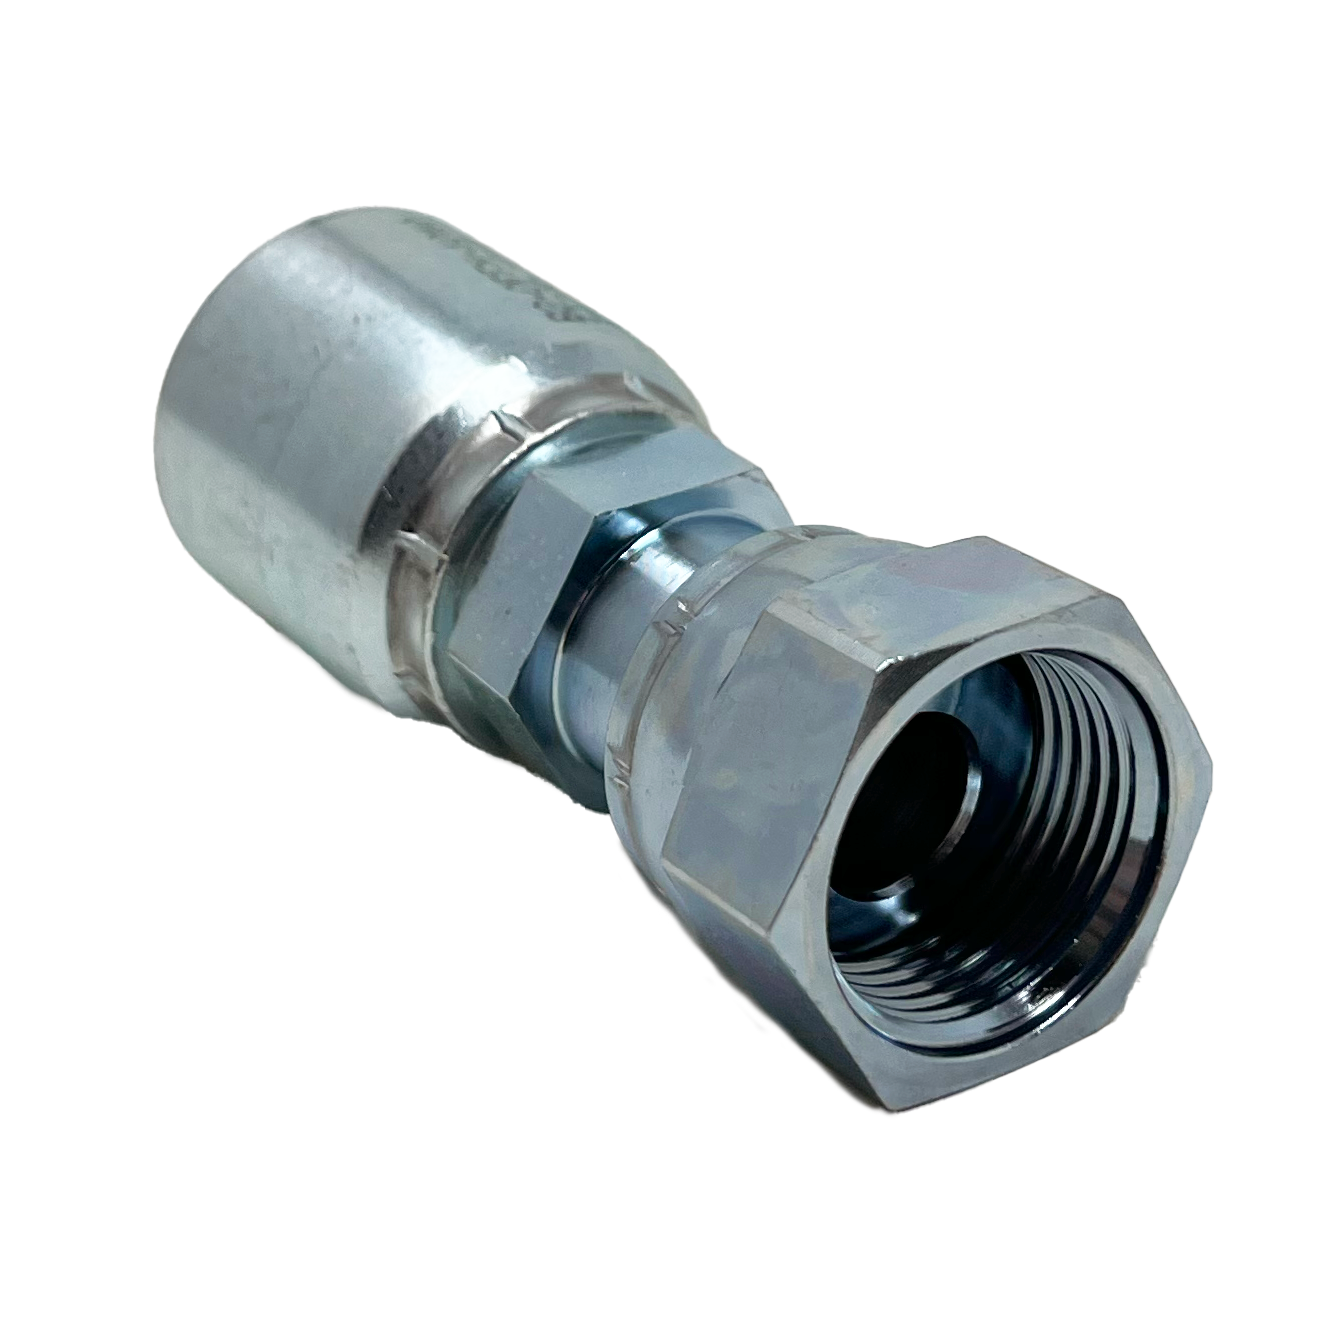 B2-OFFX-1012: Continental Hose Fitting, 0.625 (5/8") Hose ID x 1-3/16-12 Female ORFS, Straight Swivel Connection